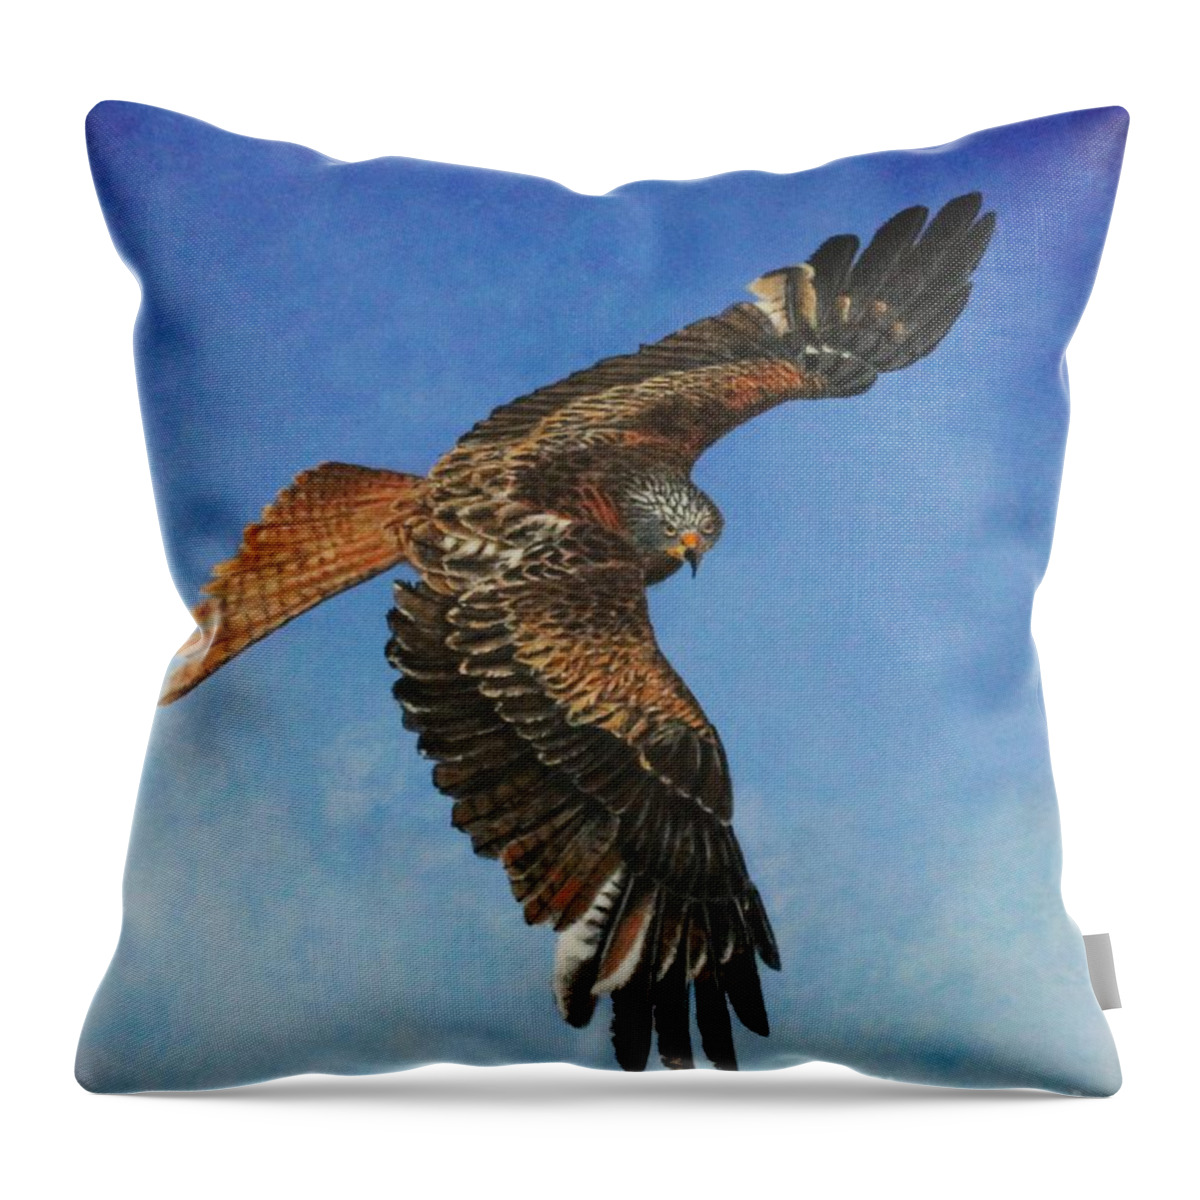 Red Kite Throw Pillow featuring the painting The Red Kite by Bob Williams